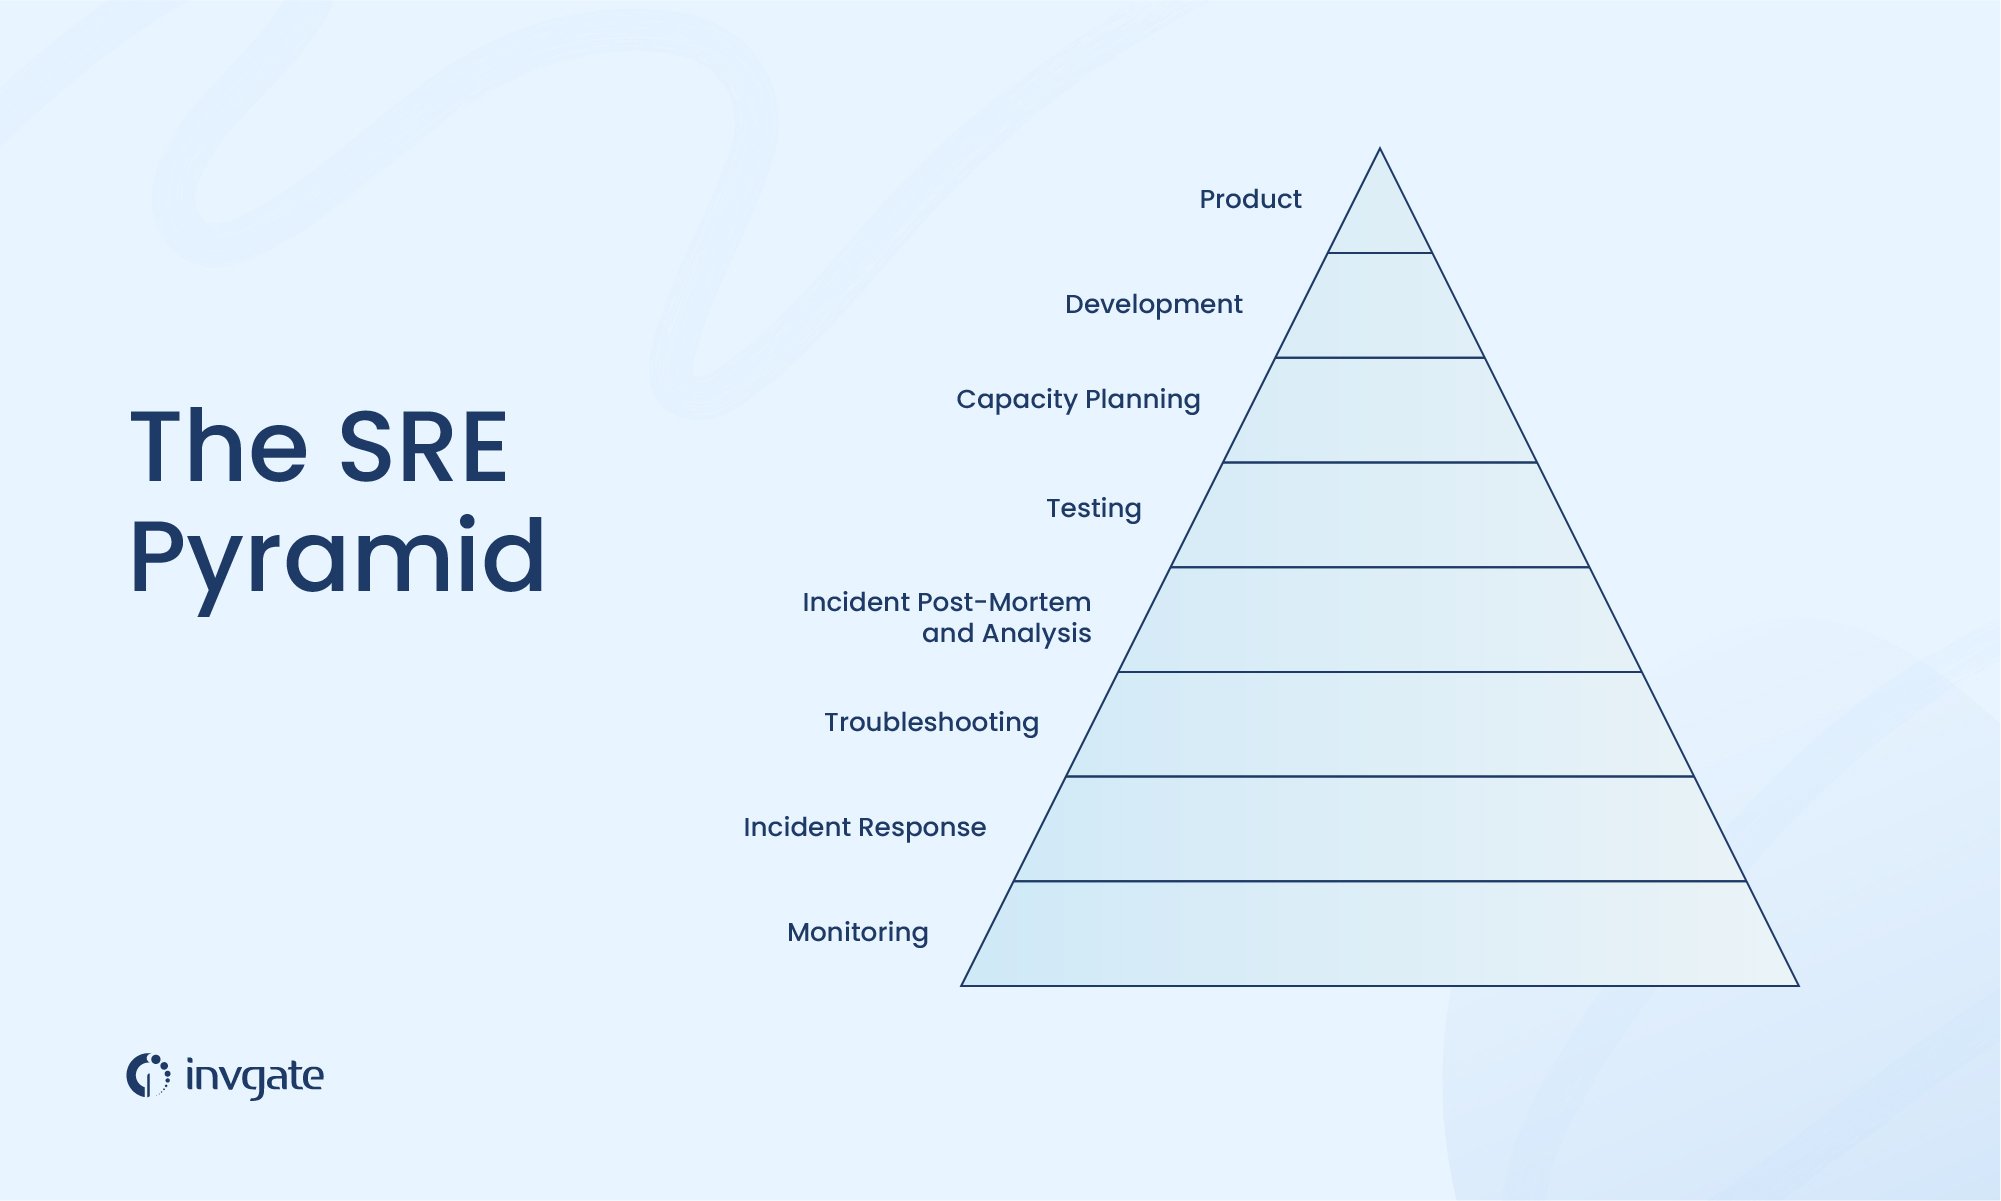 The SRE pyramid determines which services are necessary (and thus lower in the pyramid), and which ones depend on those needs being met.